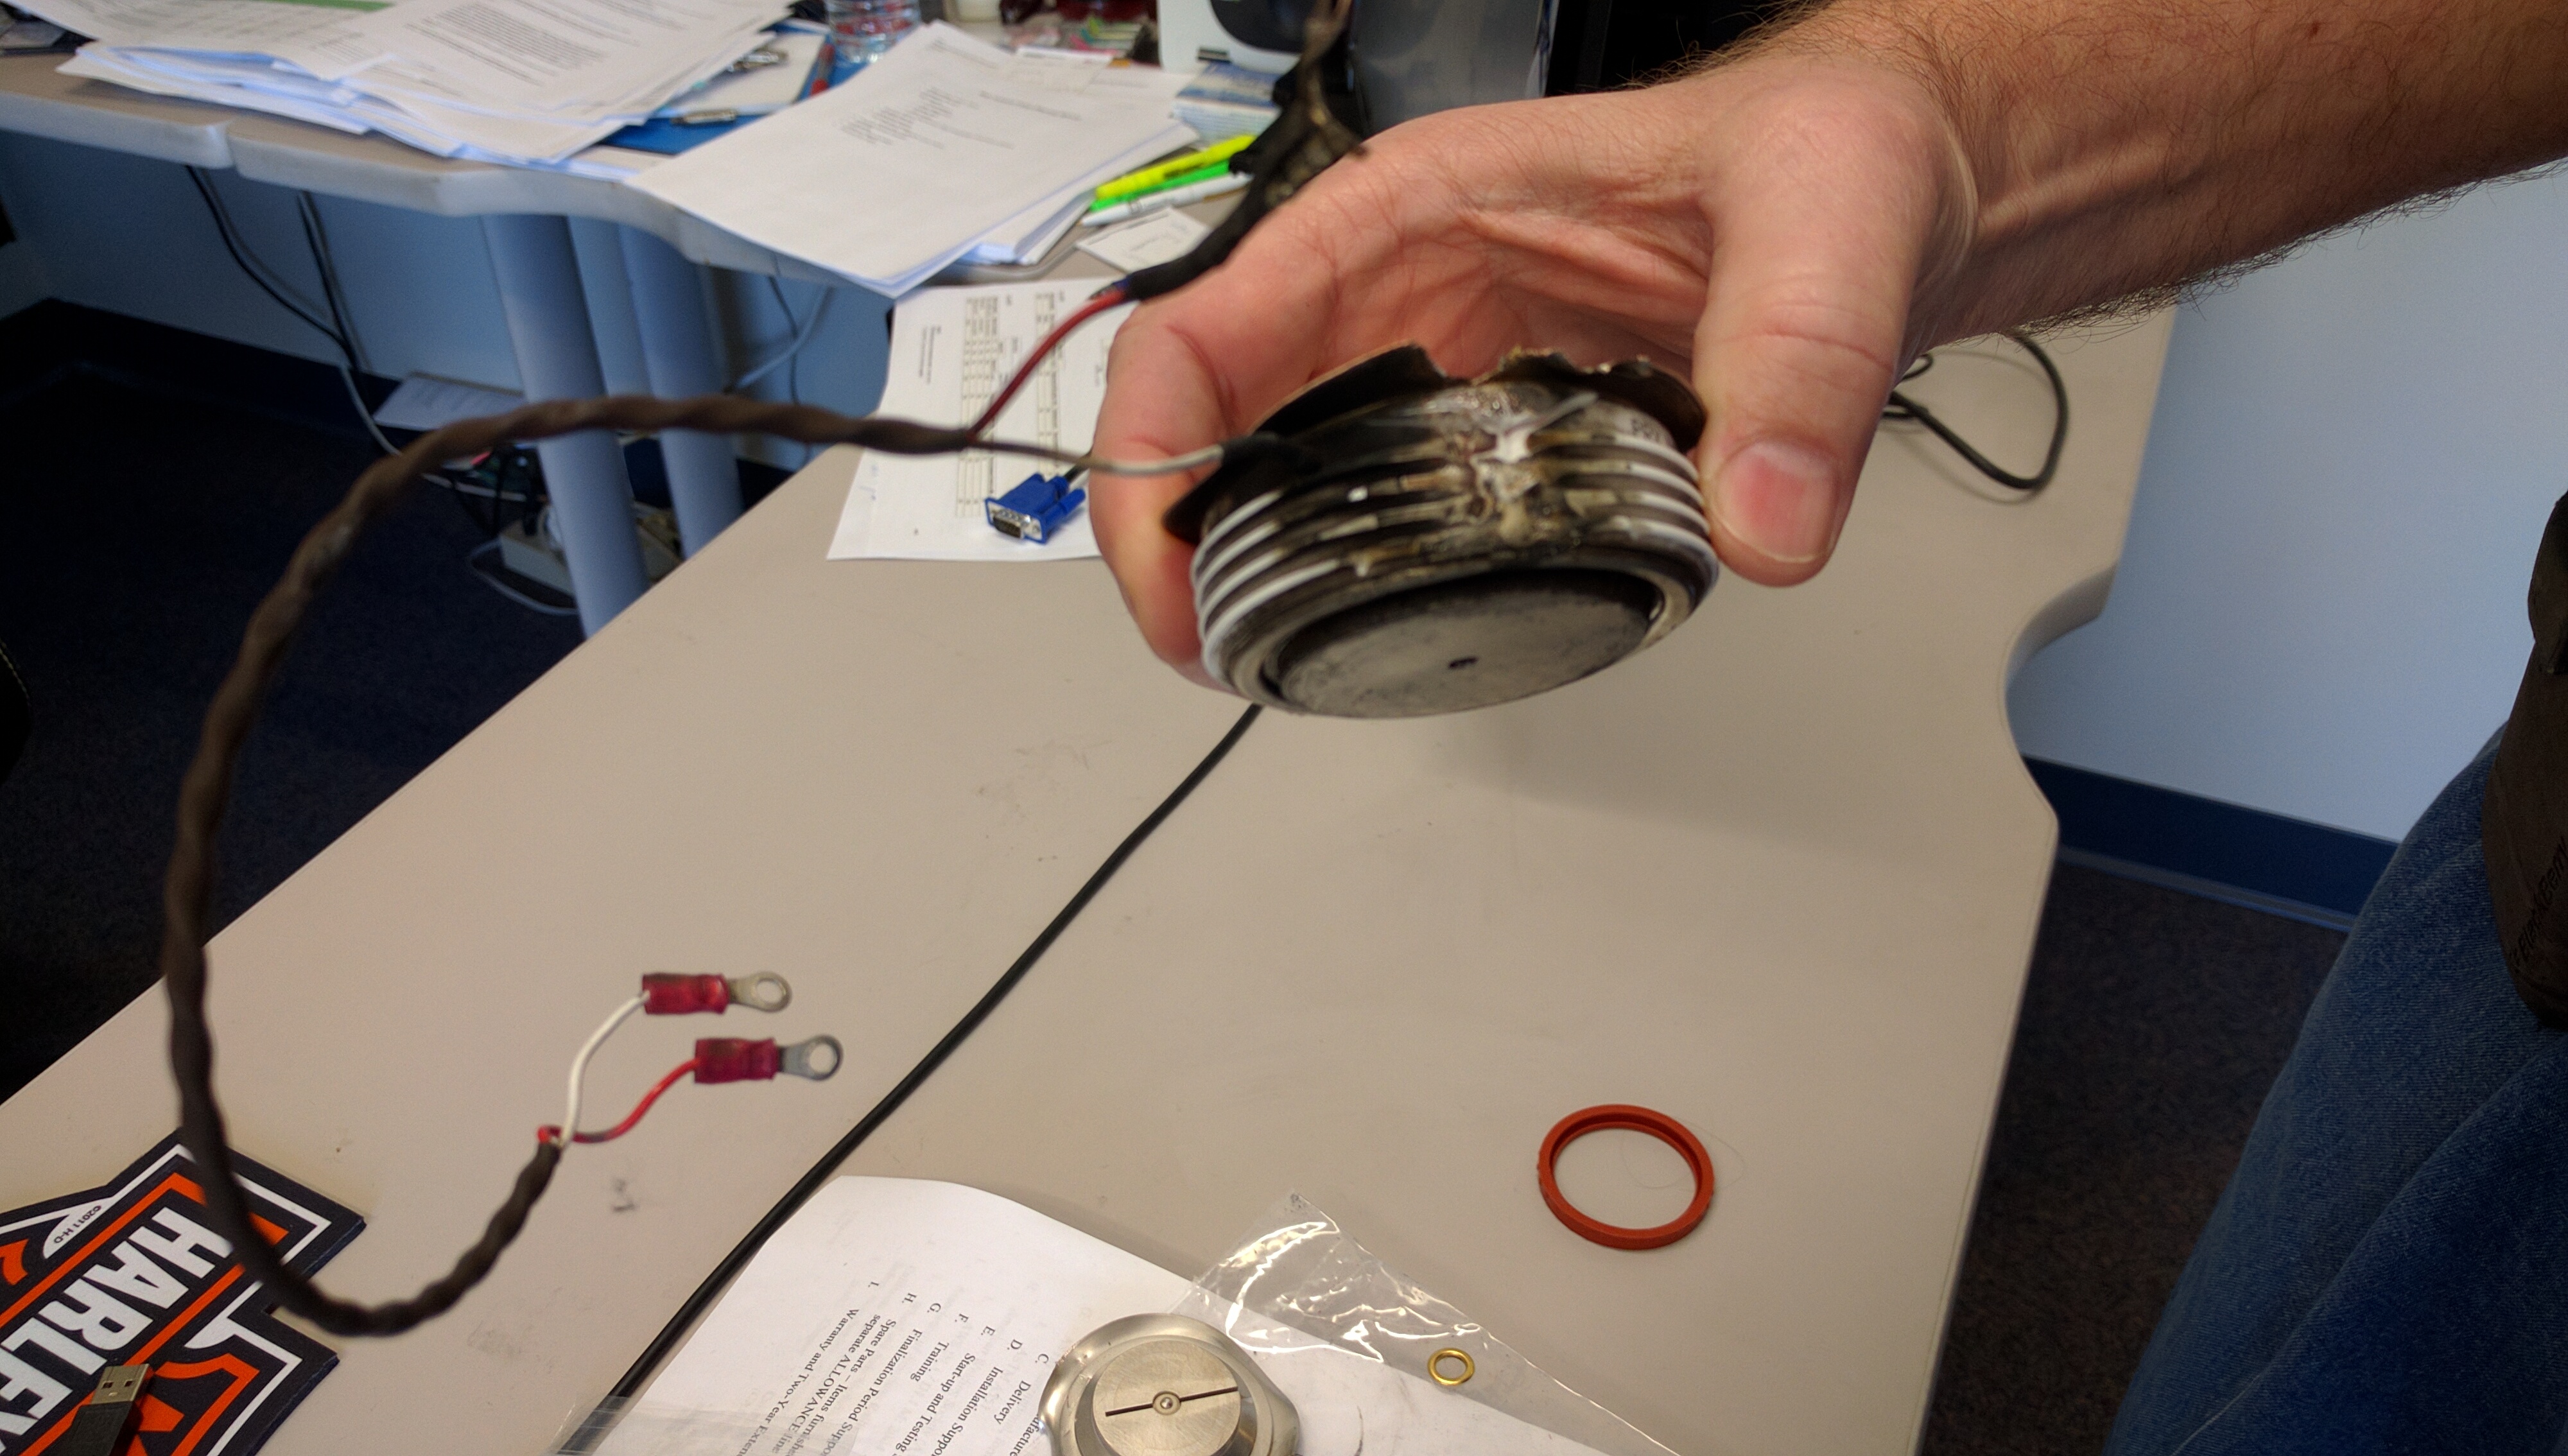 Somehow this thyristor pack, which should be able to handle 3x the voltage it should ever encounter in the BART system, is getting fried. Photo: Streetsblog.